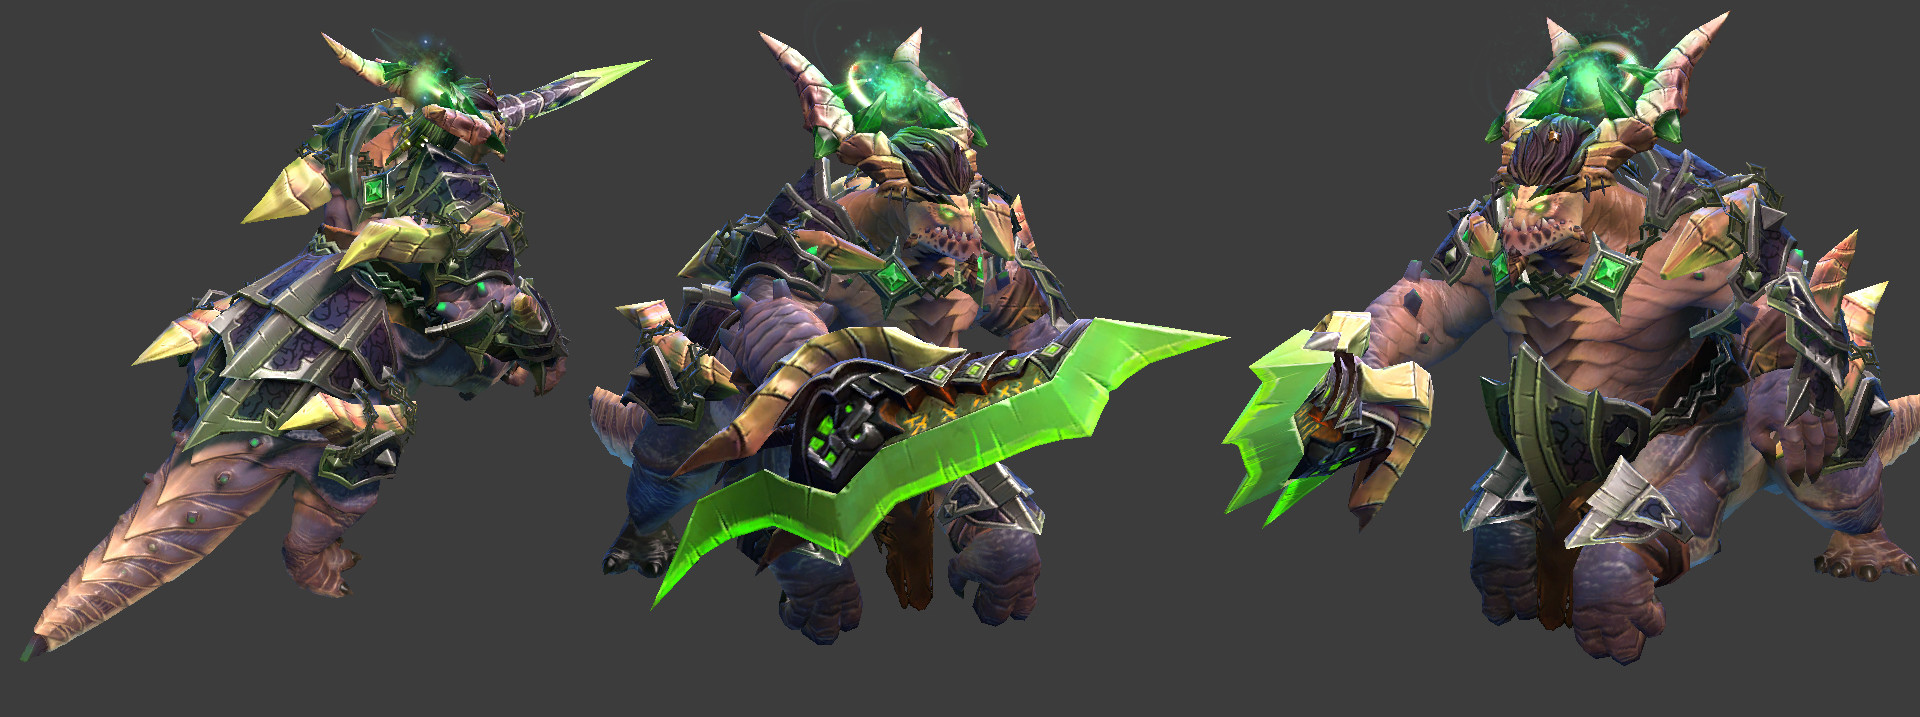 Pit lord for dota 2 фото 35